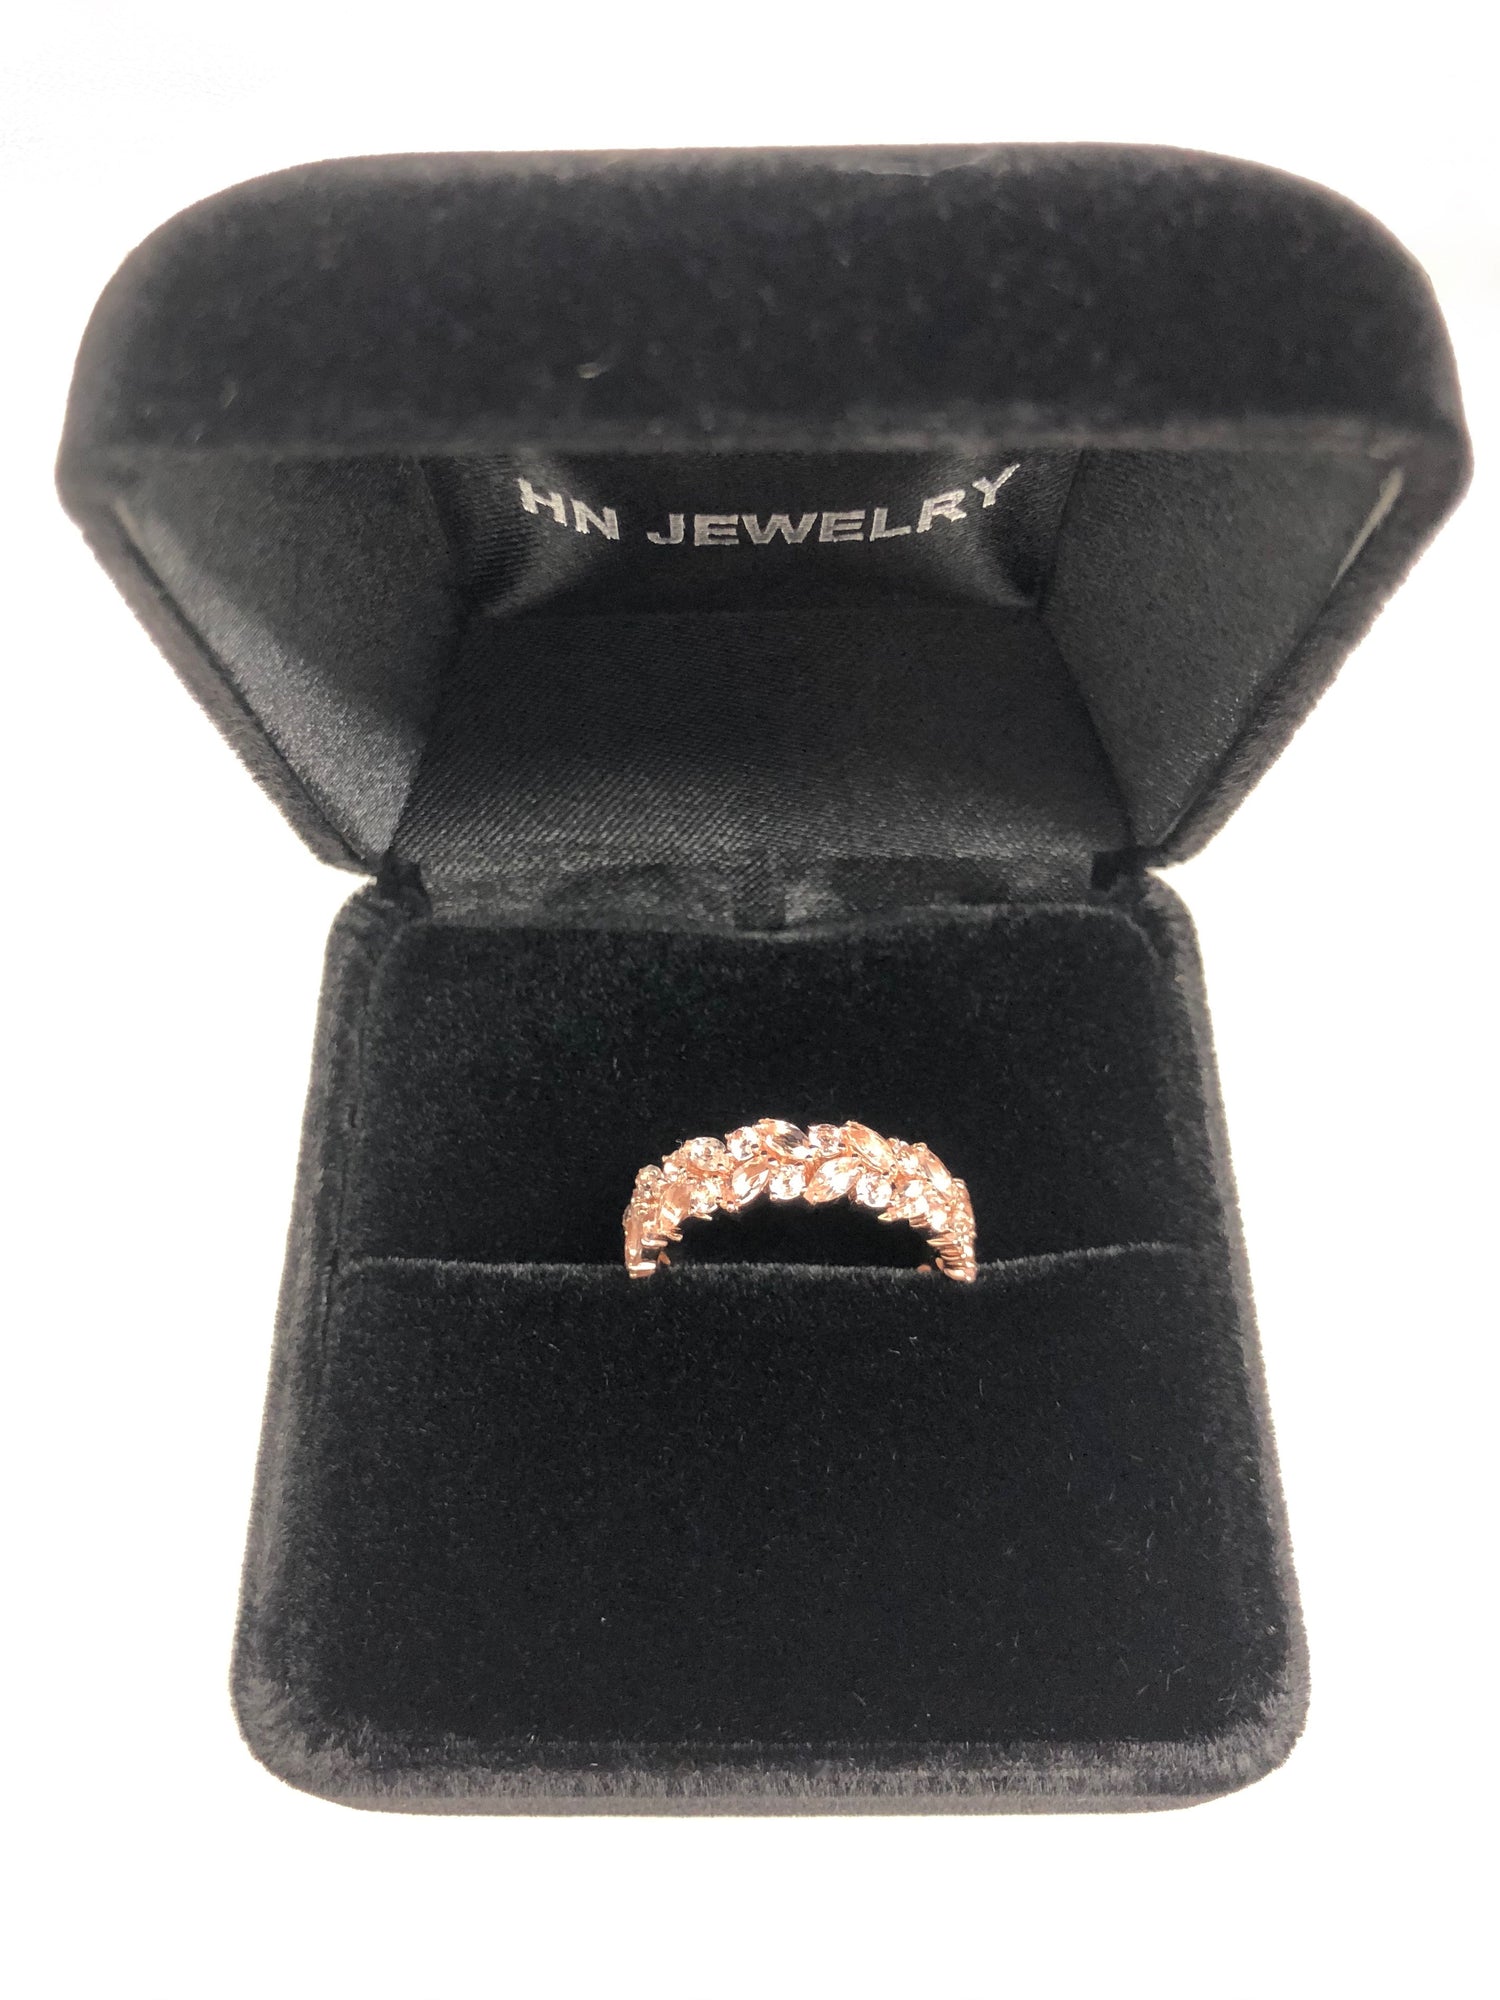 Champagne Marquise Morganite Half Eternity Ring in 14K Rose Gold - HN JEWELRY